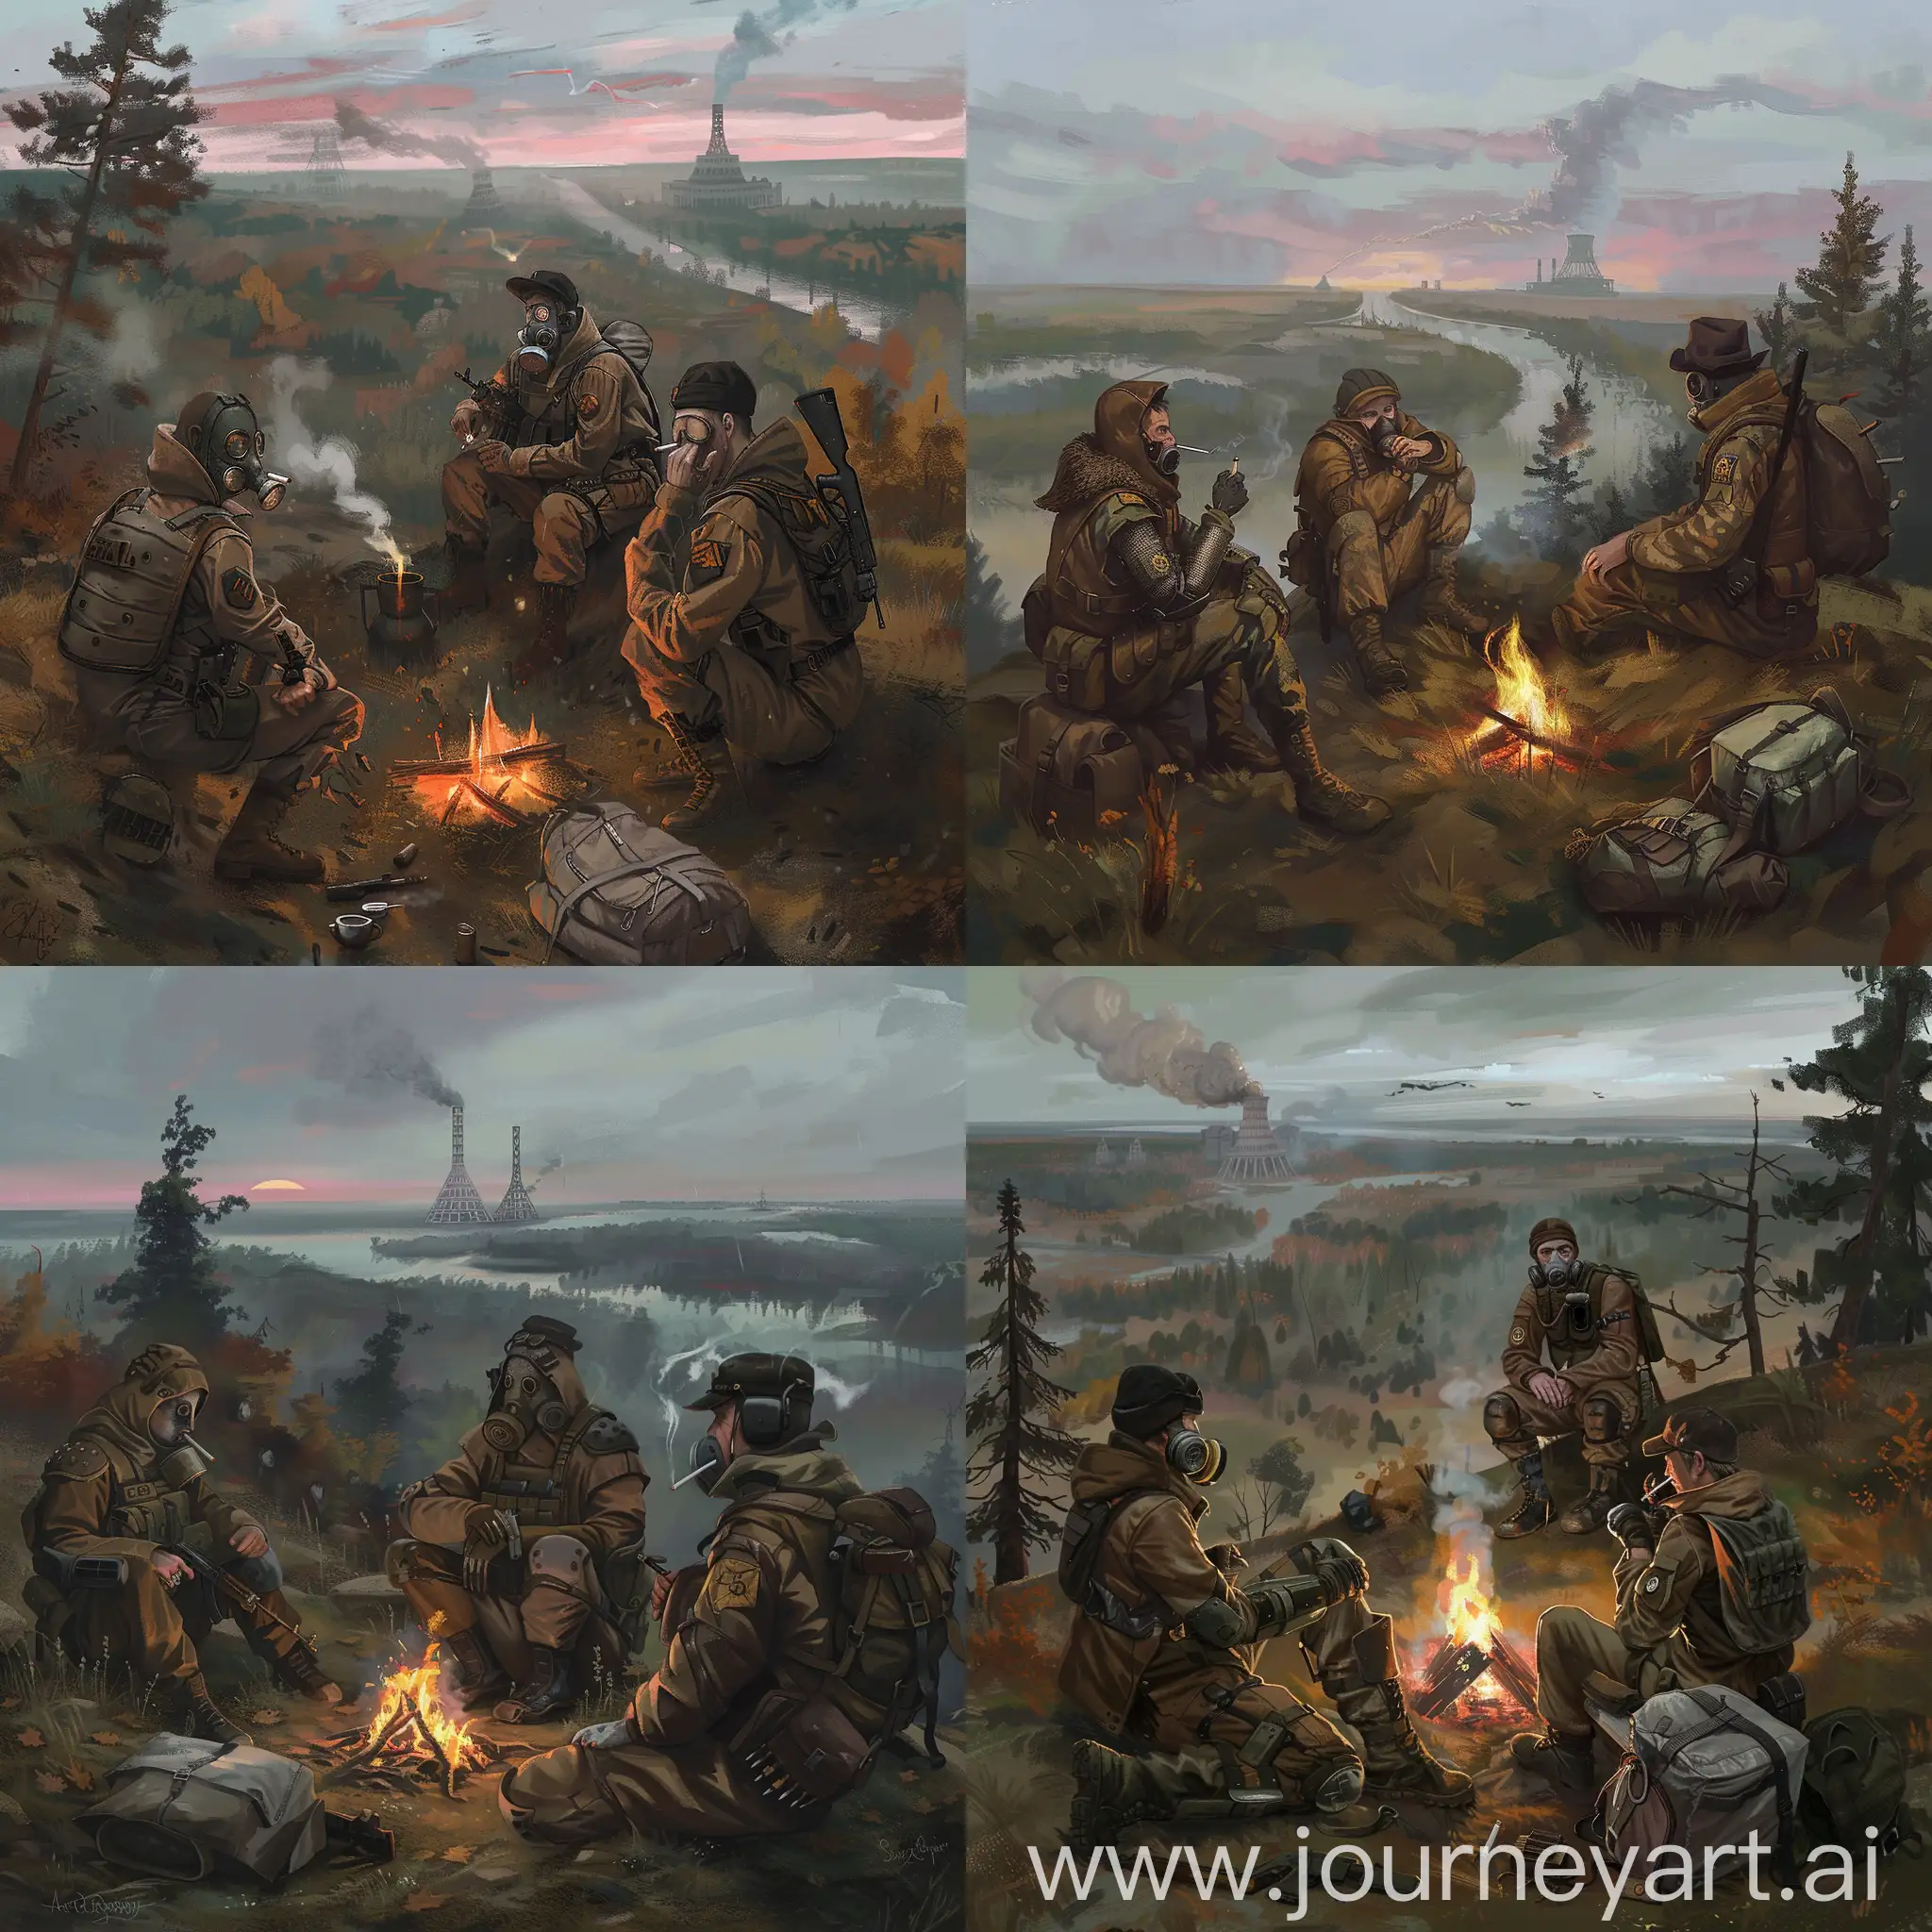 Stalker art, three stalkers are sitting on a hill by a campfire, the first stalker is wearing a brown raincoat with armor, a gas mask and a weapon in his hands, the second stalker is smoking a cigarette, he is wearing a black hat, dressed in a brown military jumpsuit, next to him lies a gray backpack, the third stalker is wearing a mask and a brown military jumpsuit, the weather - gloomy autumn, the view from the hill where the stalkers are sitting opens up a view of the forest and the far-standing destroyed Chernobyl power unit.